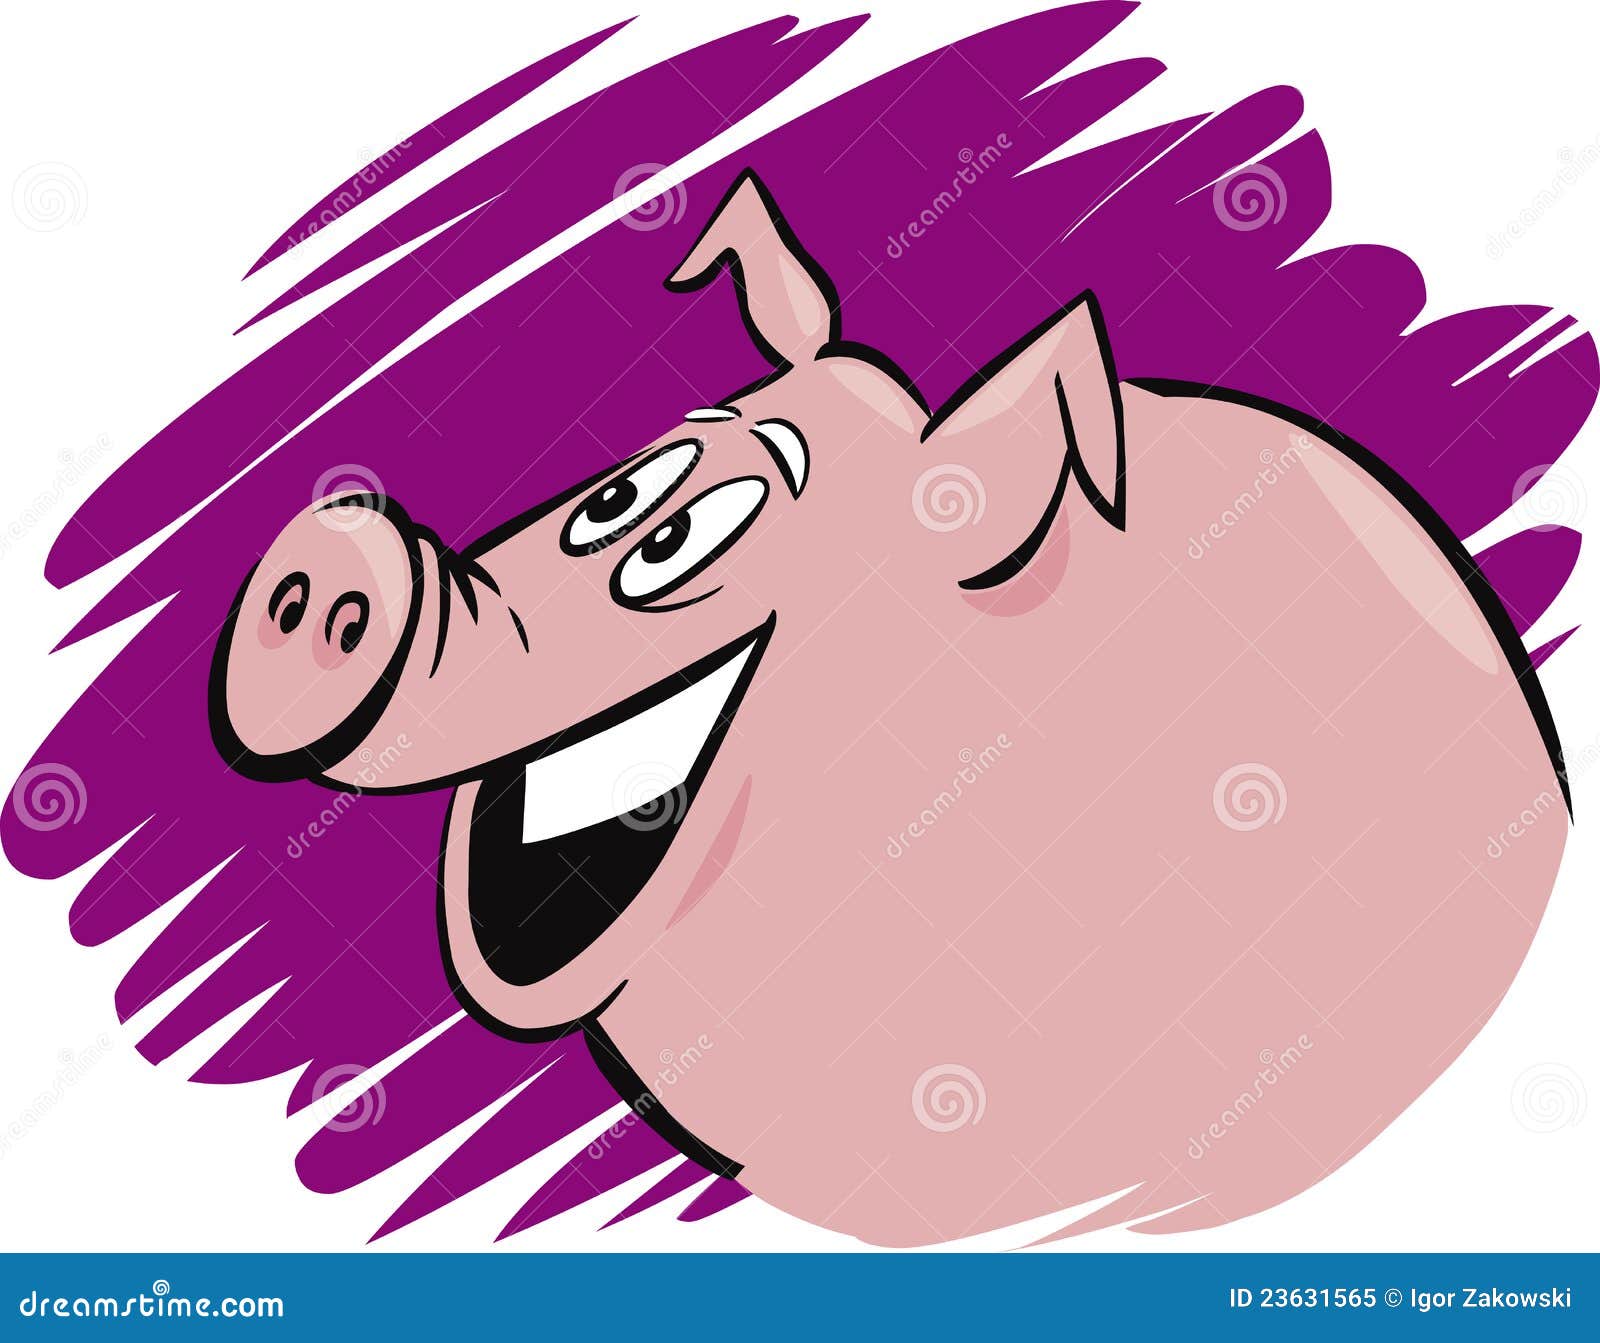 Funny pig stock vector. Illustration of cottage, drawing - 23631565